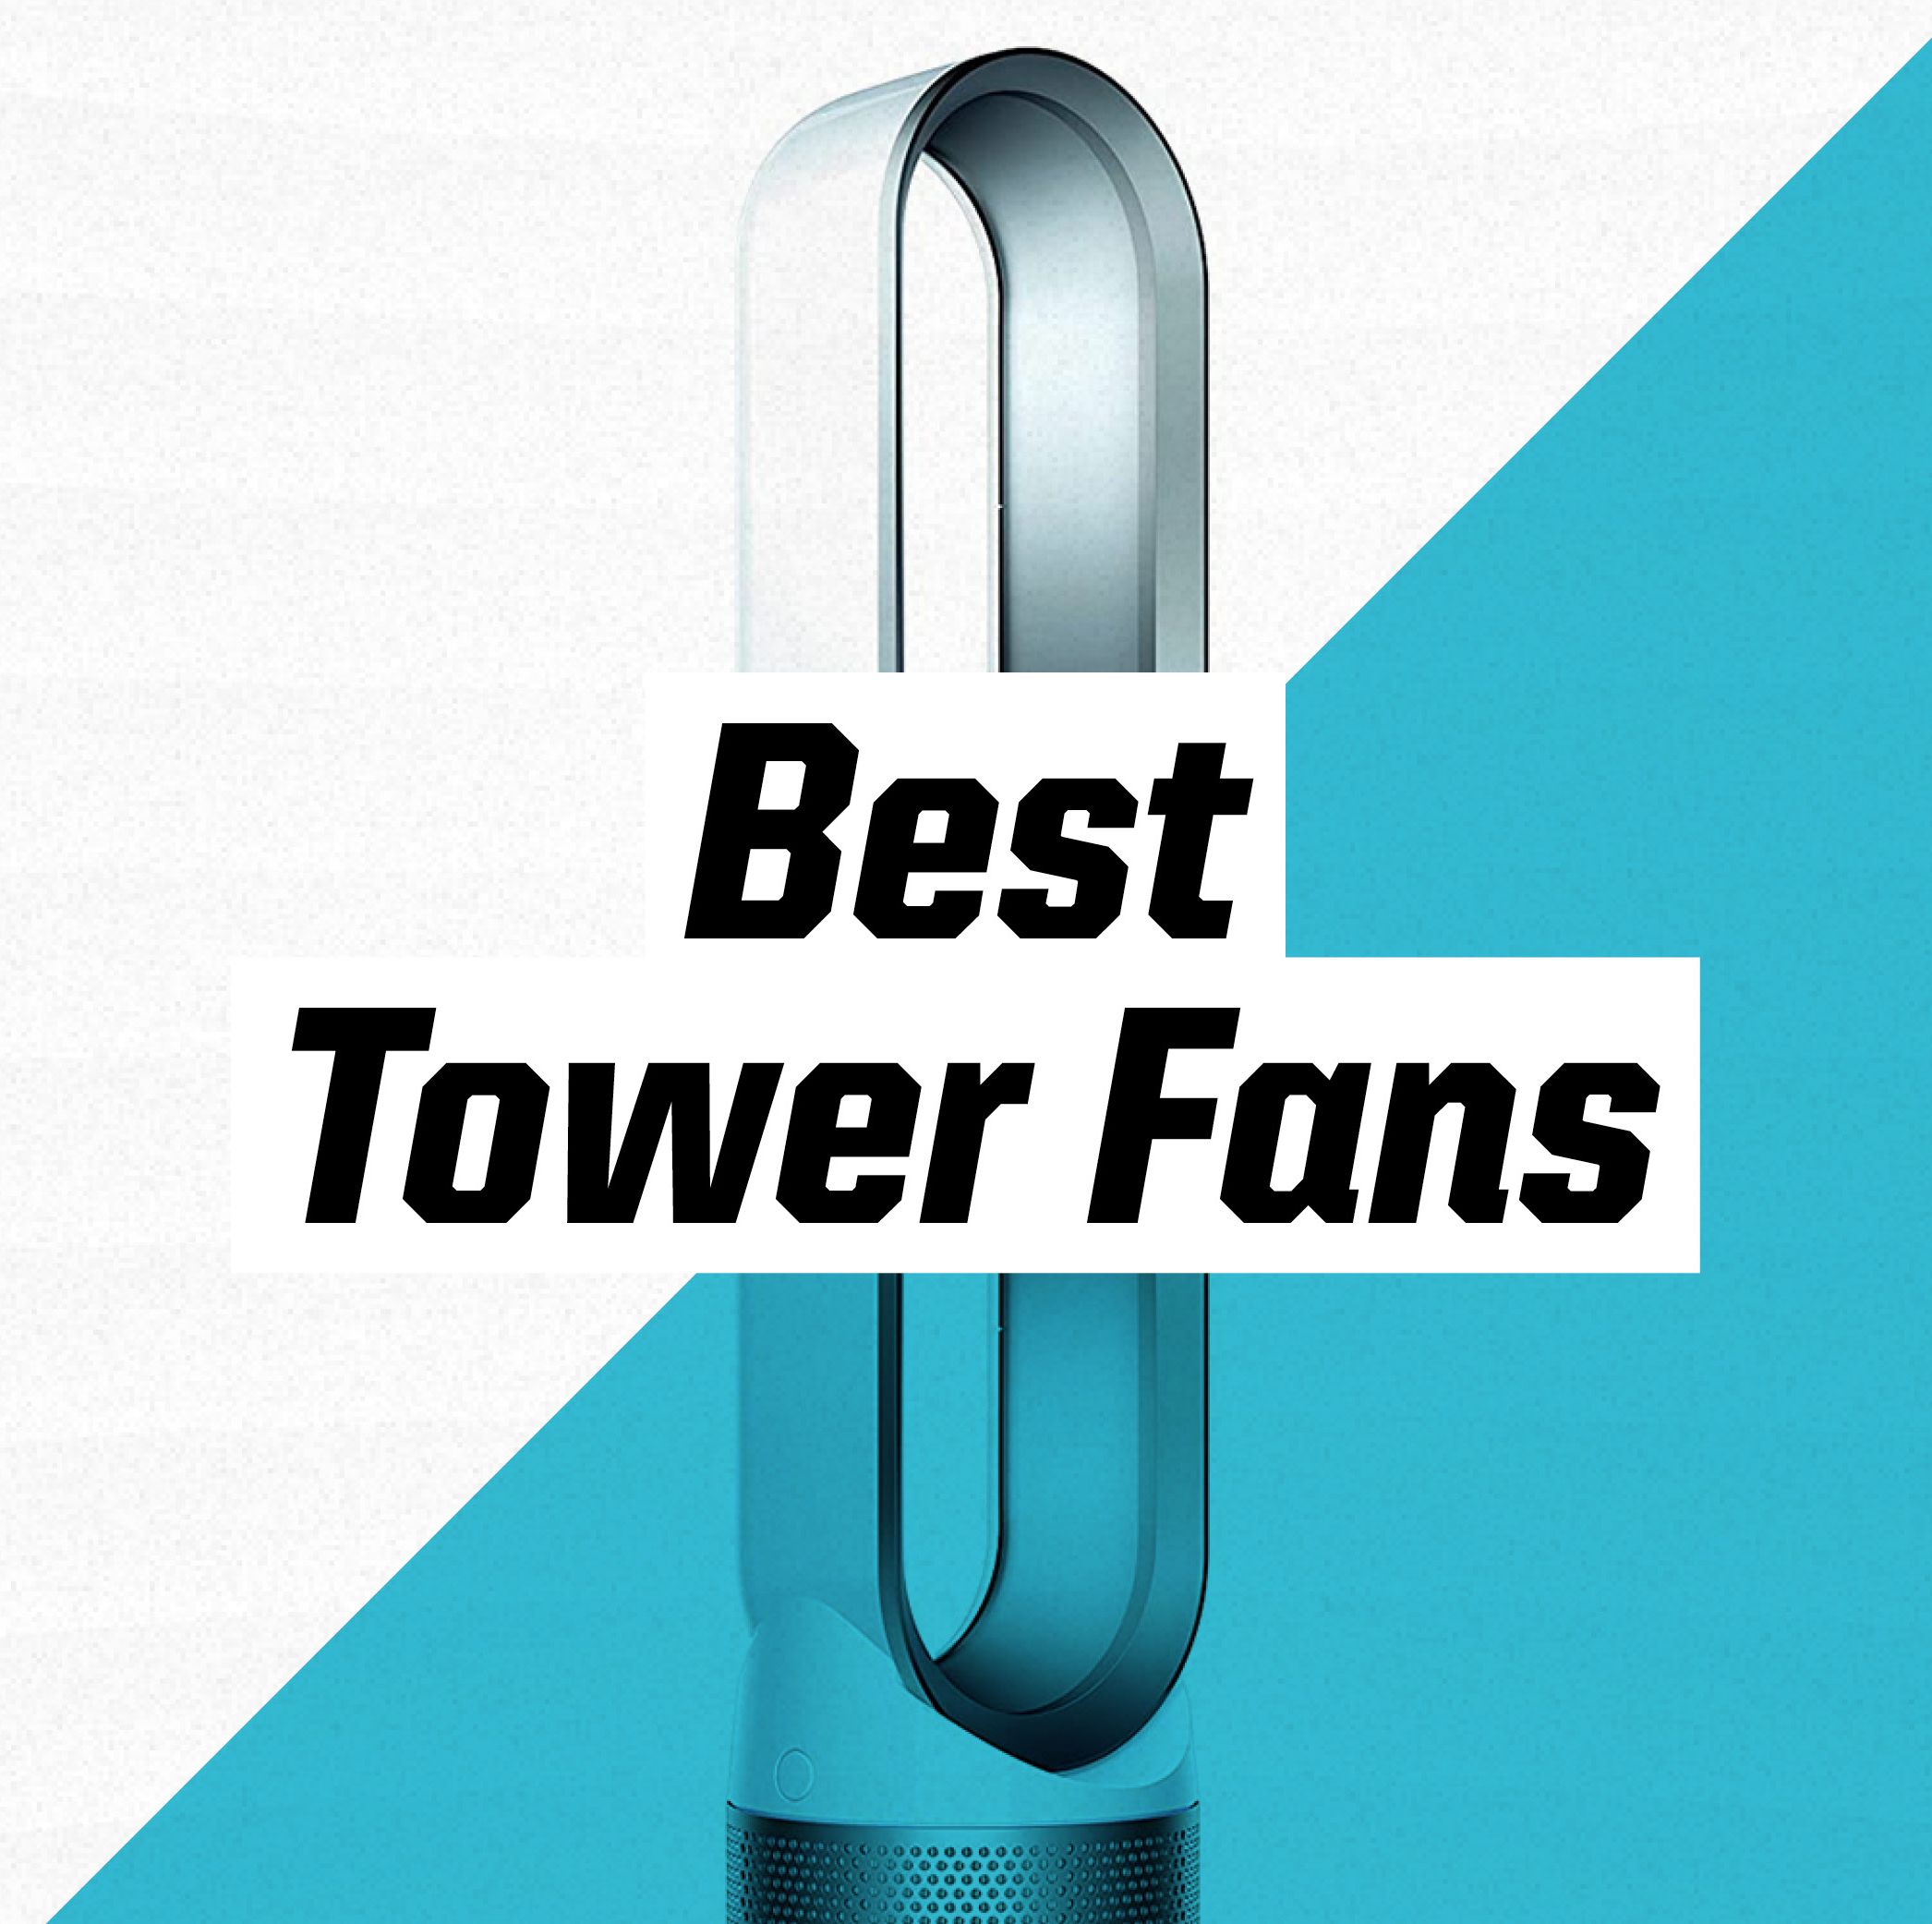 These Top-Rated Tower Fans Will Keep You Cool All Summer Long